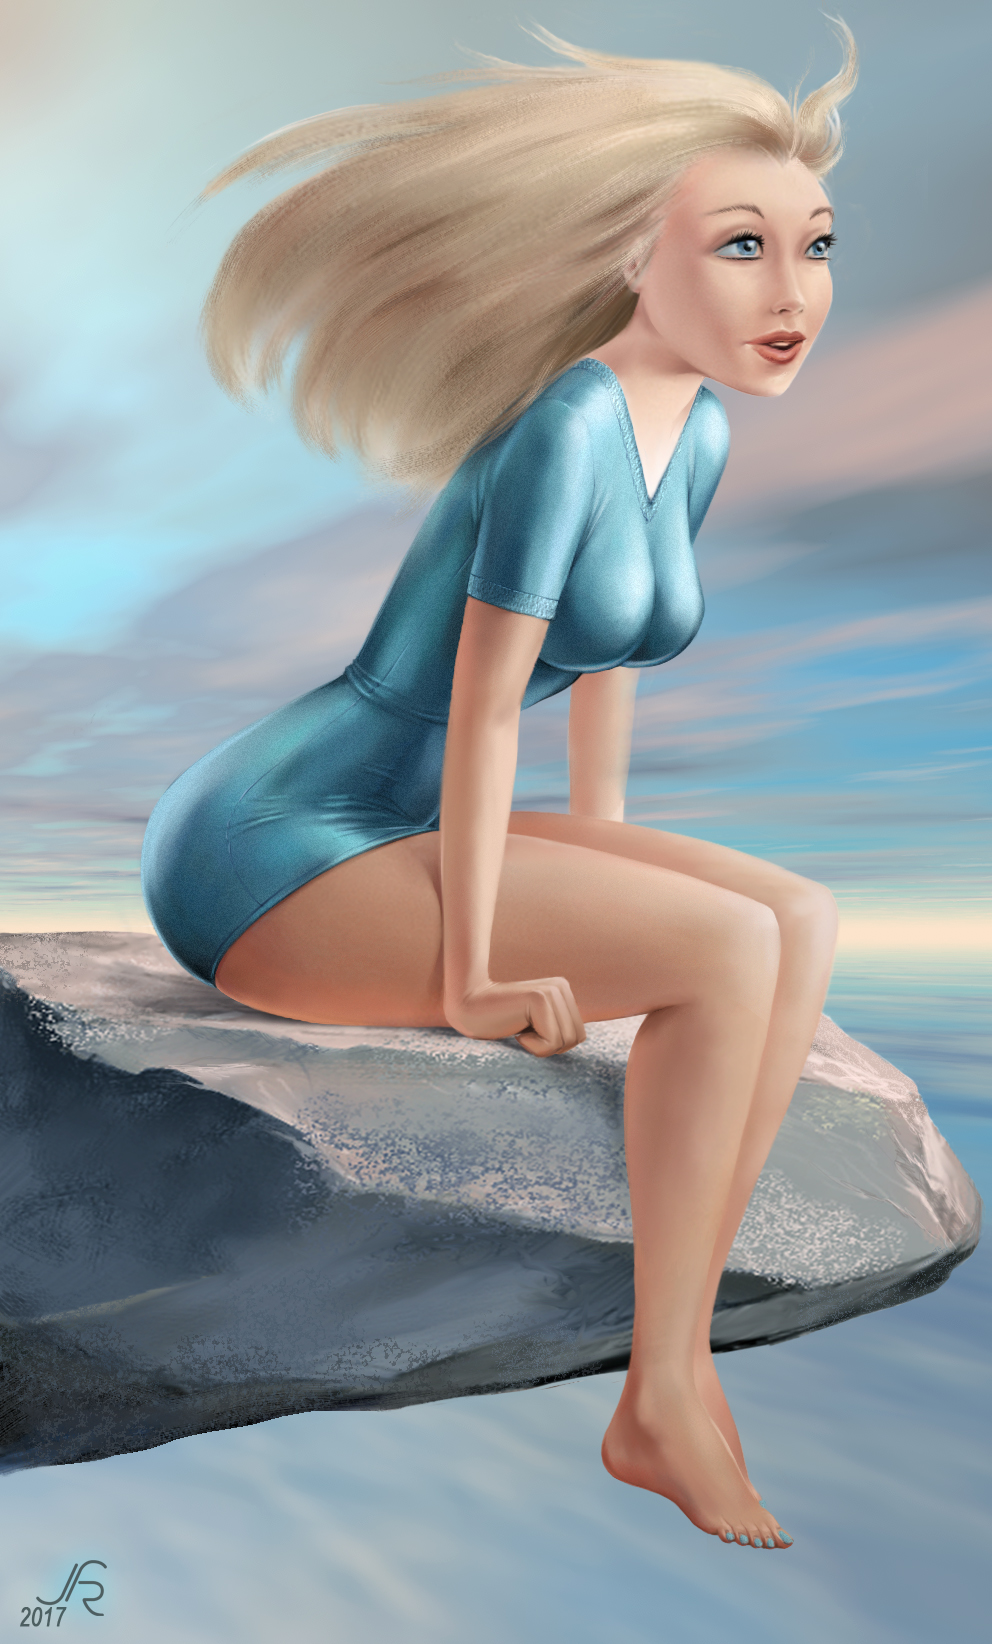 The girl sitting on a rock - study 1